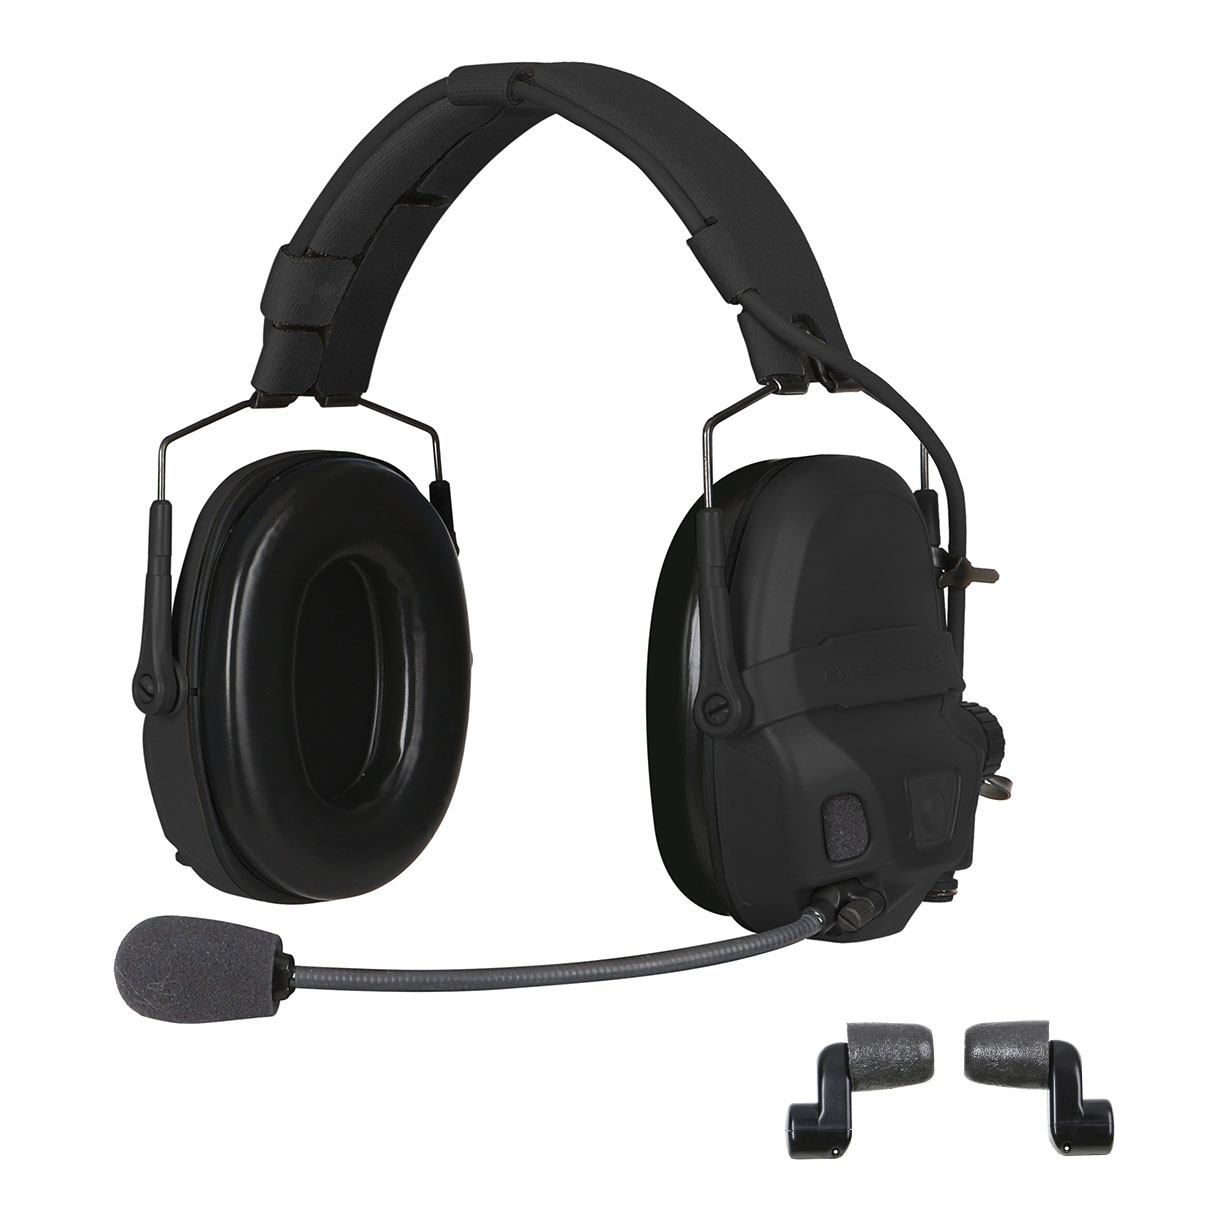 Gentex awarded aviation contract for groundcrew communications headset system by UK MoD